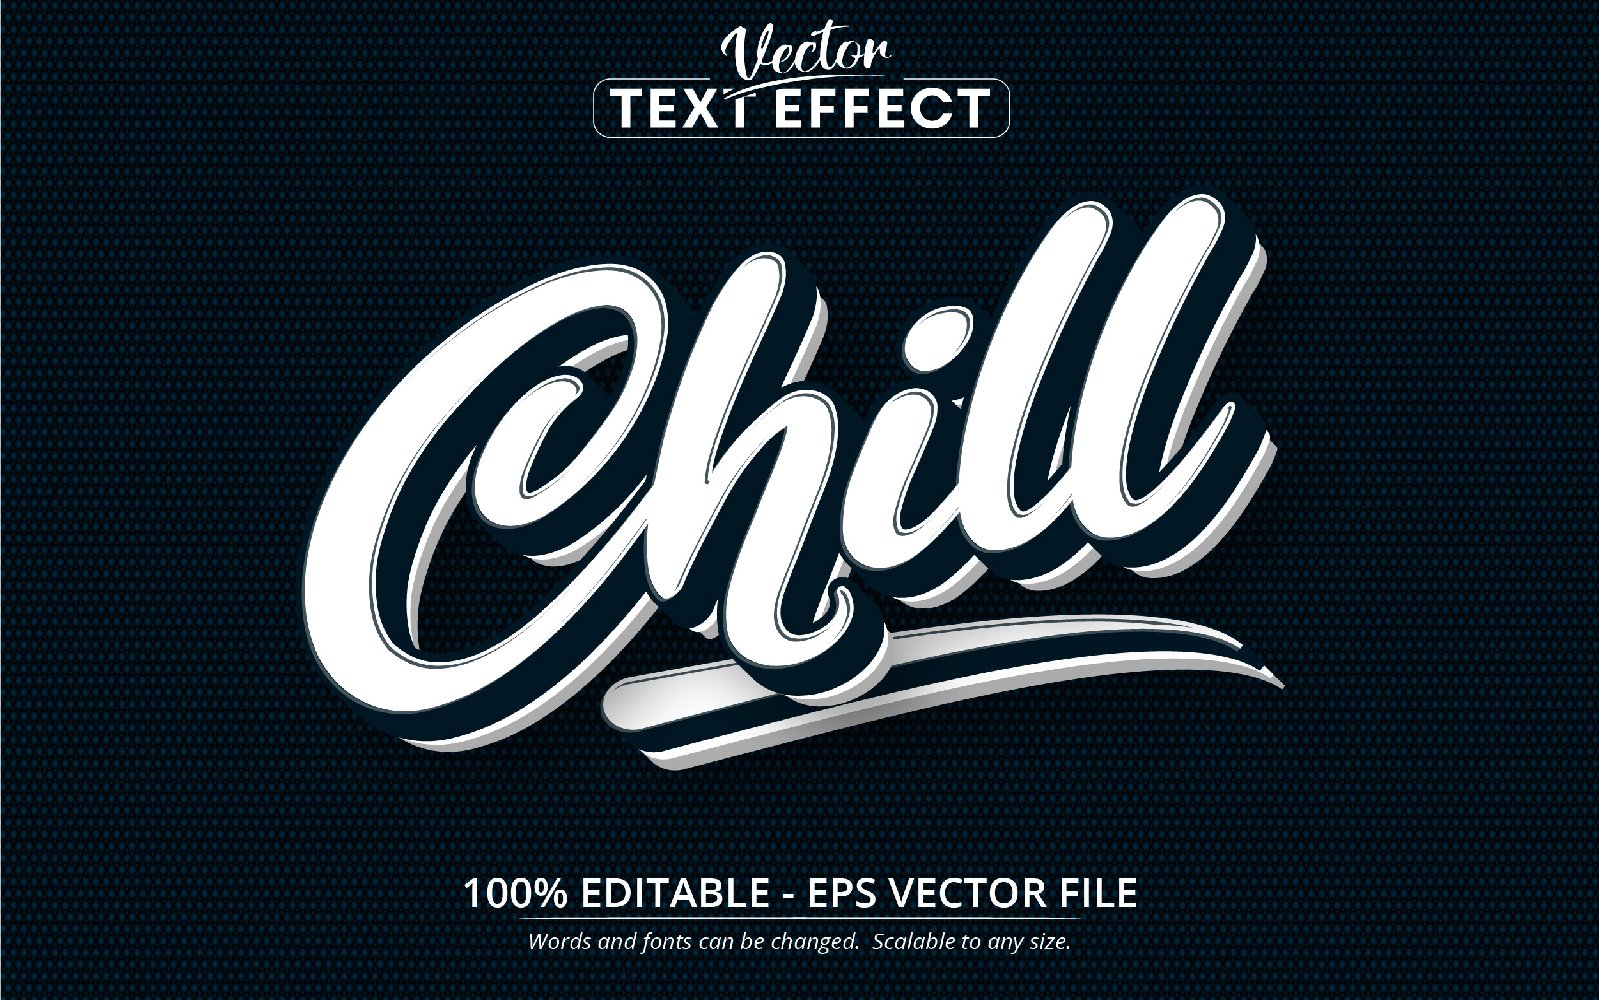 Chill - Minimalistic And Simple Style, Editable Text Effect, Font Style, Graphics Illustration